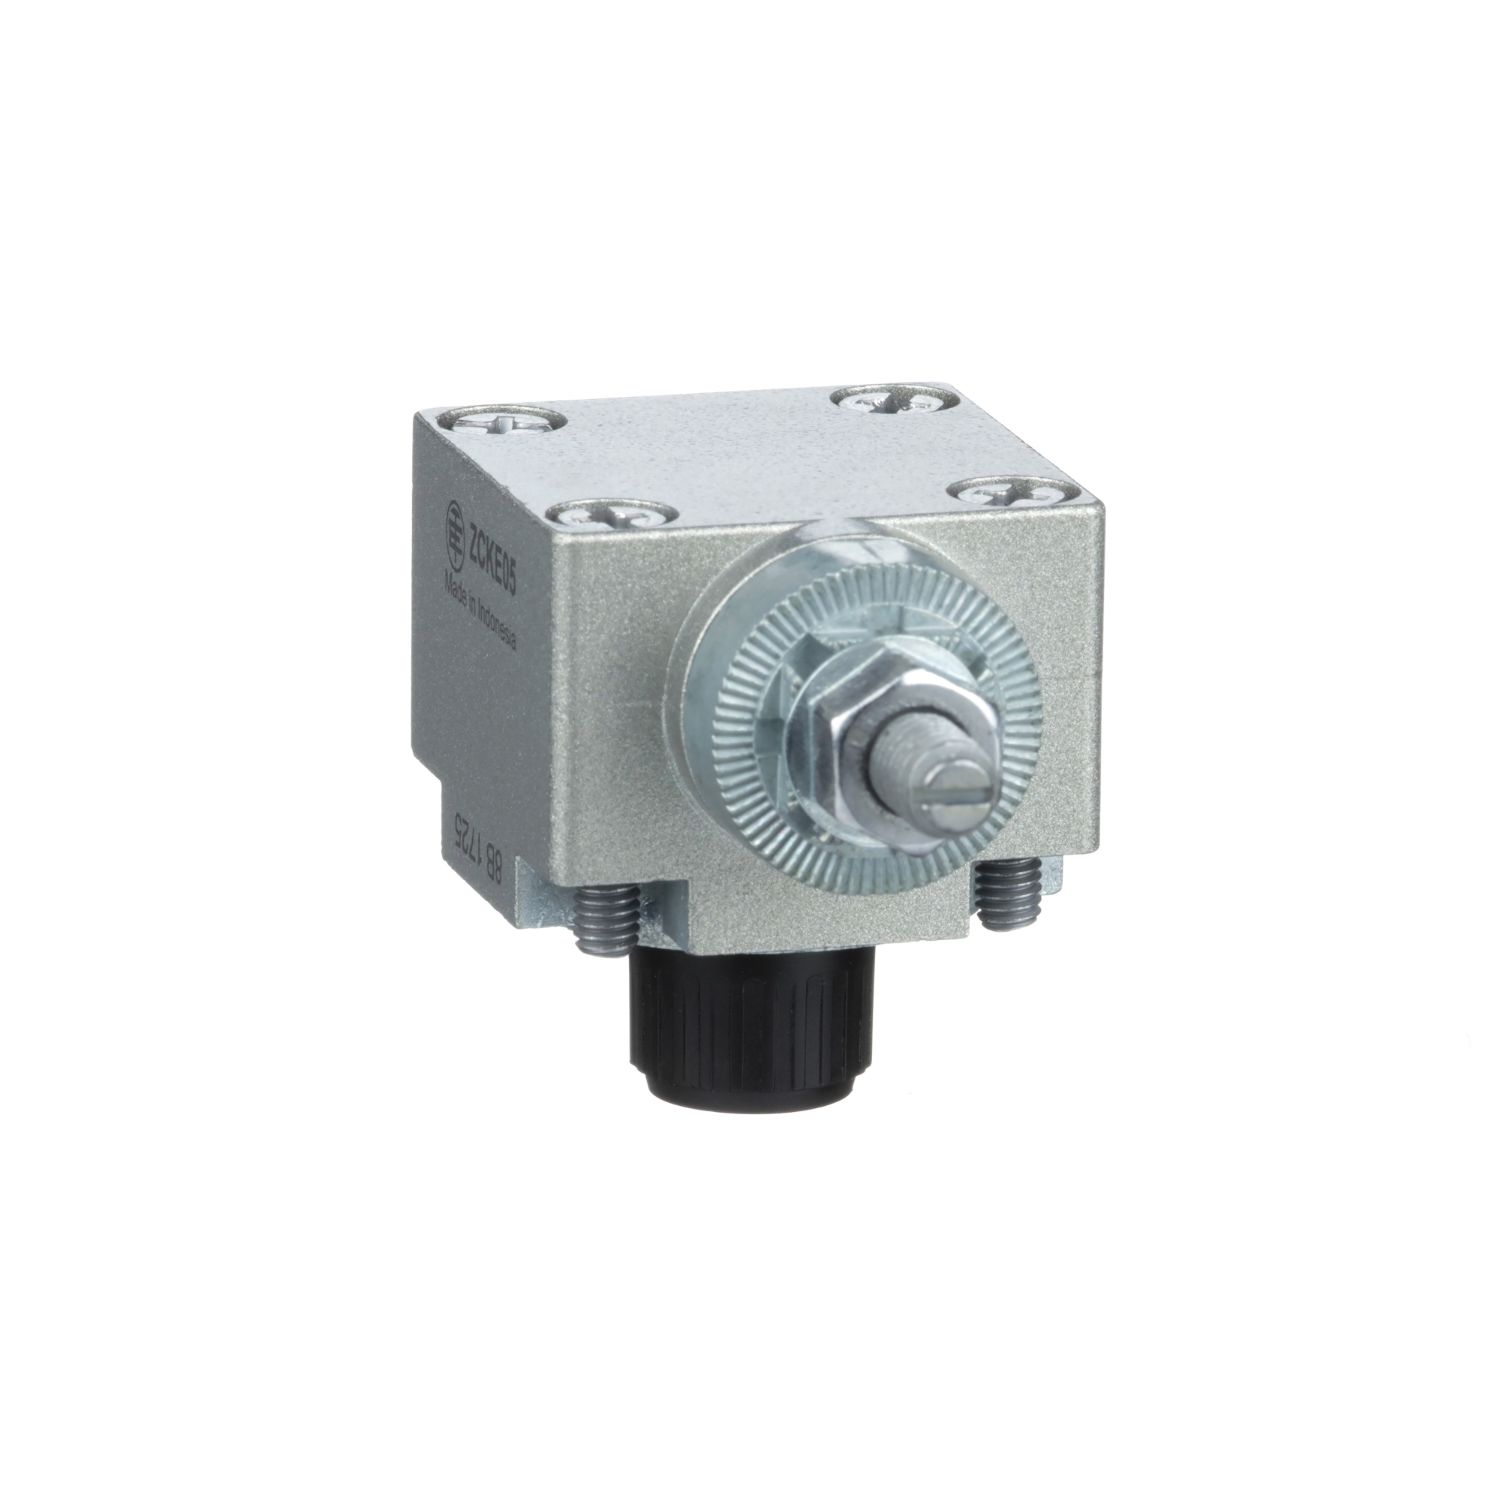 ZCKE05 limit switch head ZCKE - without lever left and right actuation